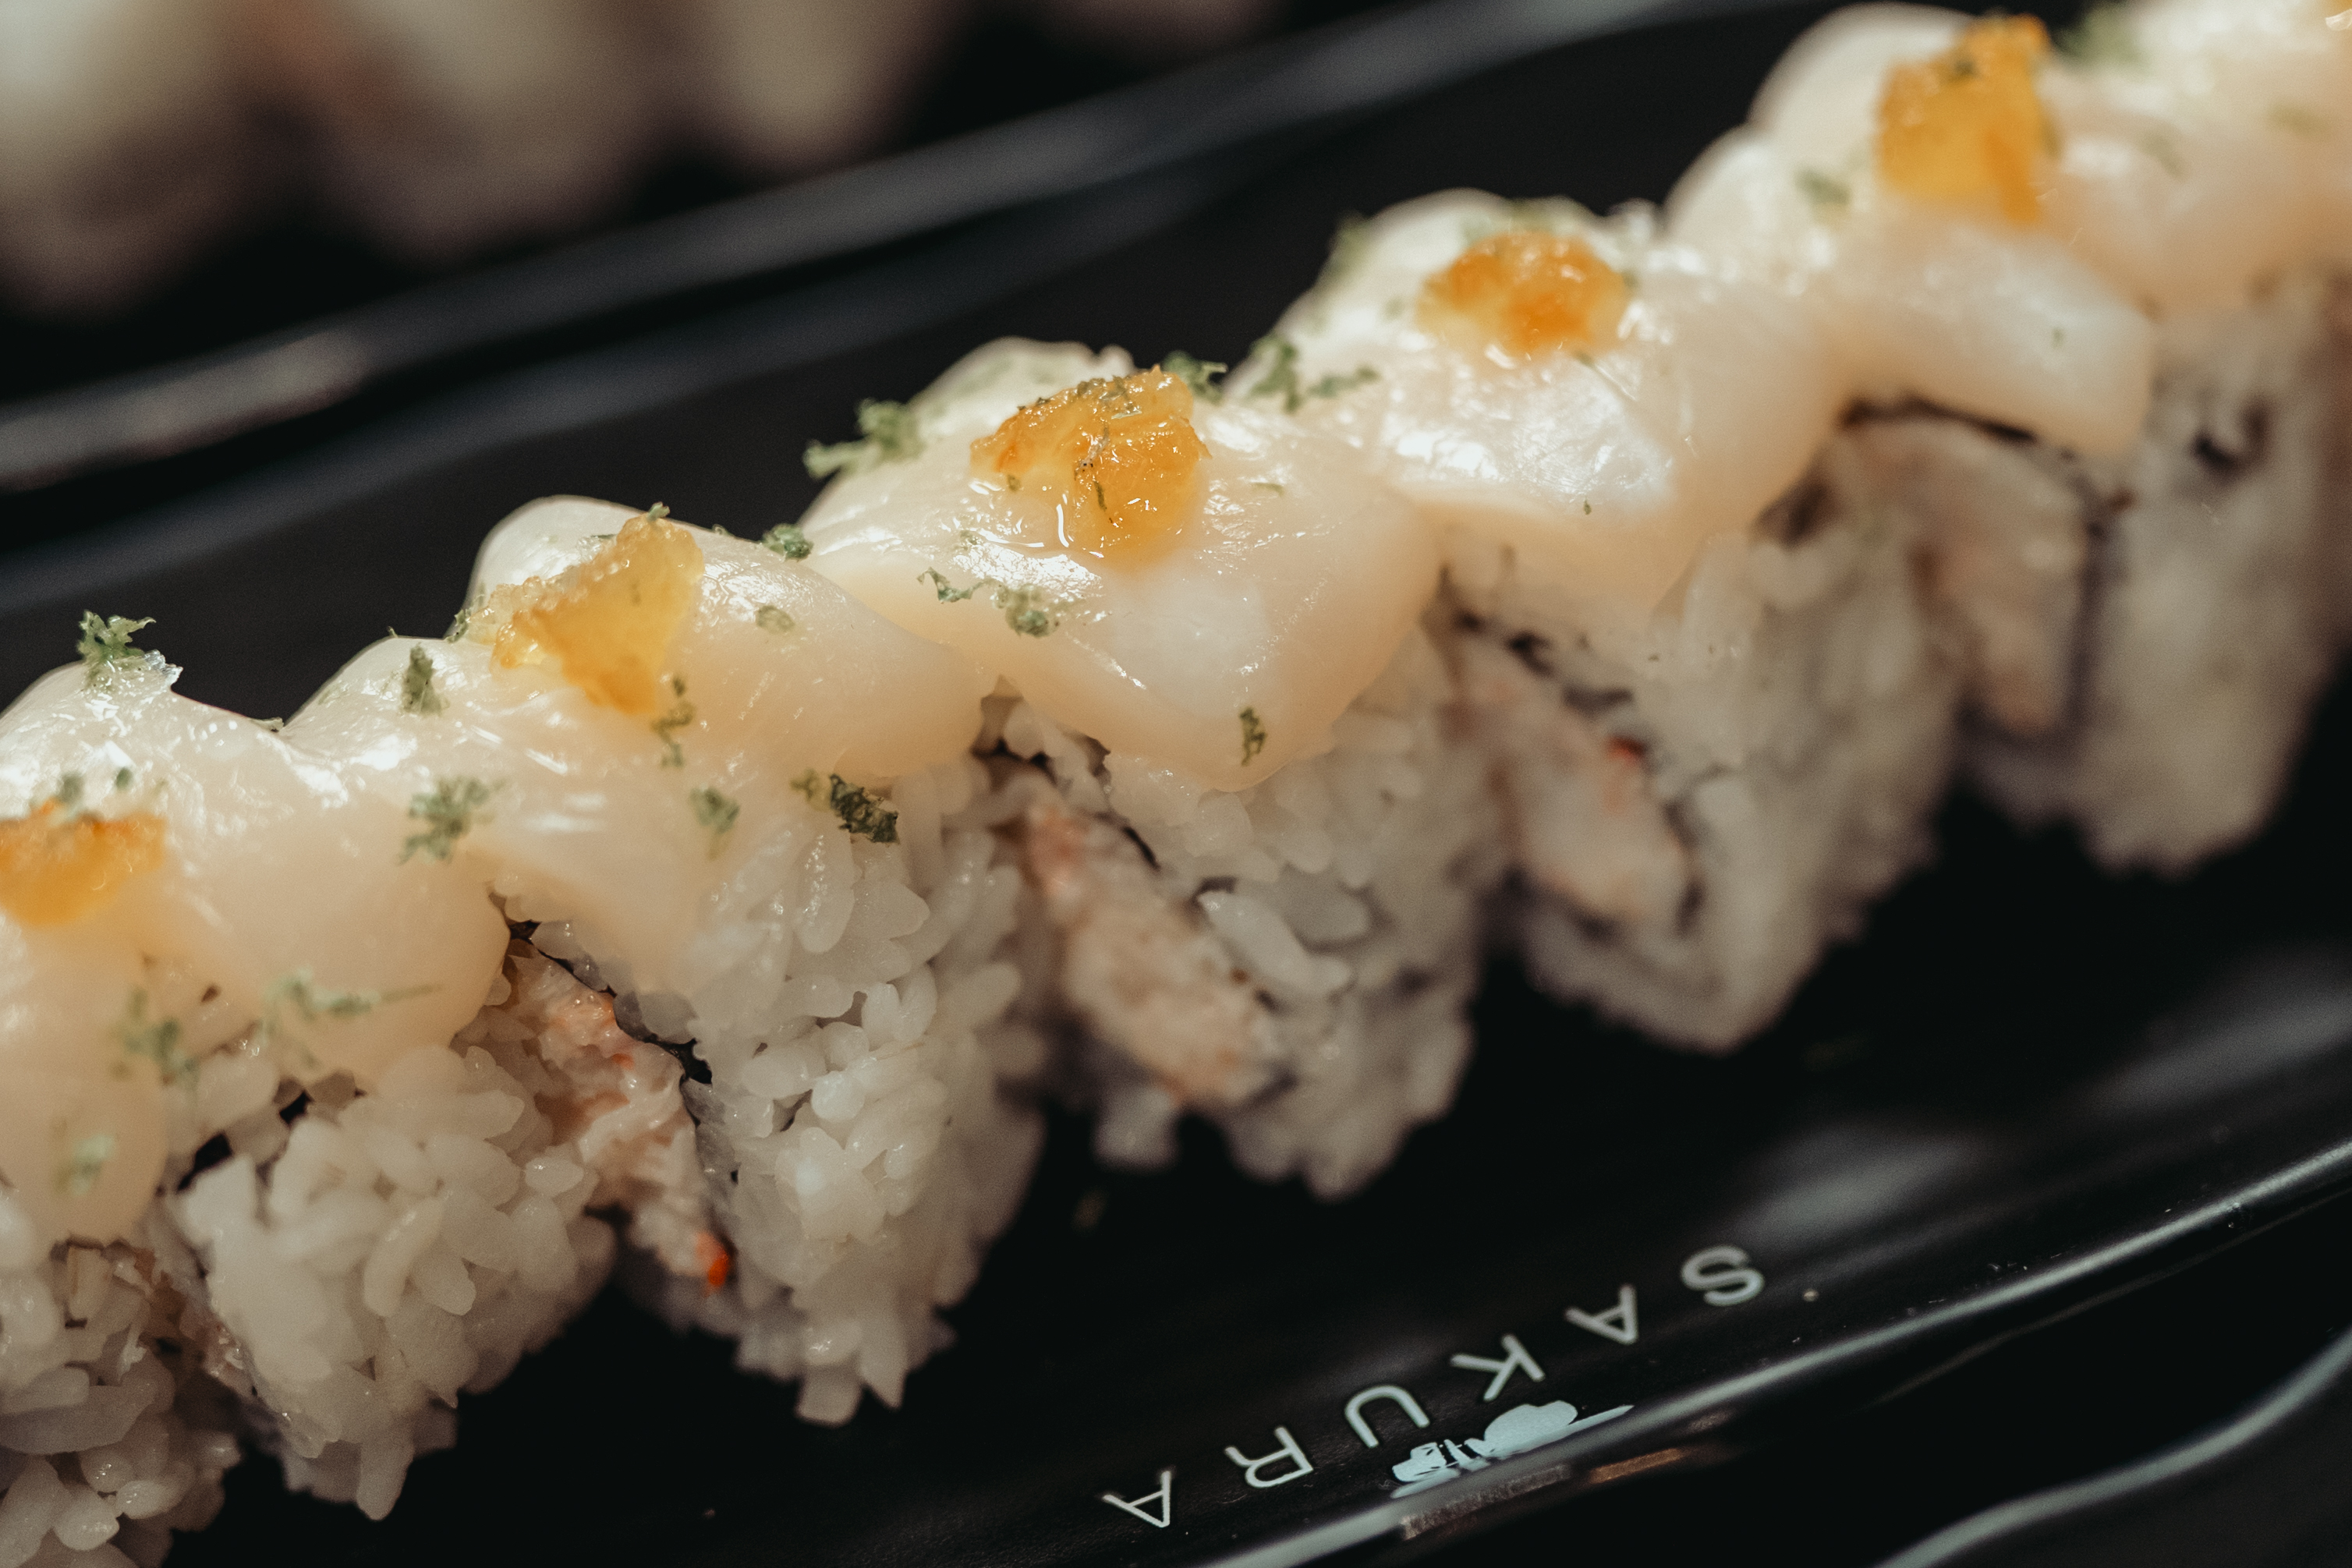 A close-up of a sushi roll topped with scallop and marmalade.